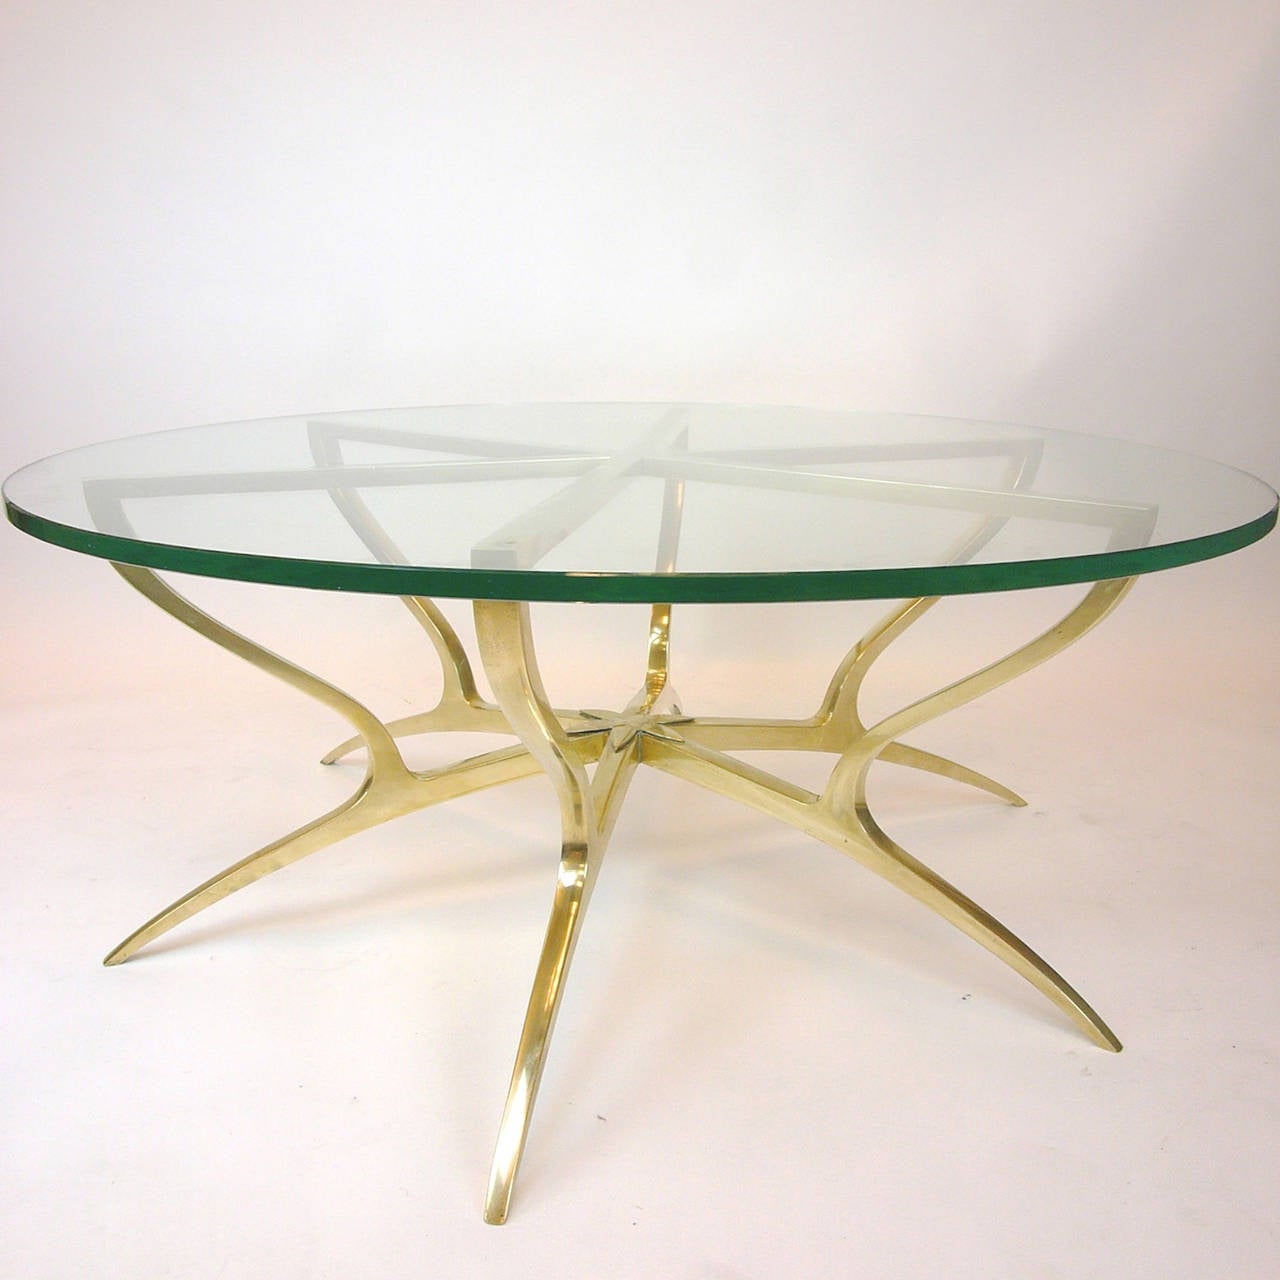 Heavy Solid Brass with Glass Italian Style Spider Legged Coffee Table 1